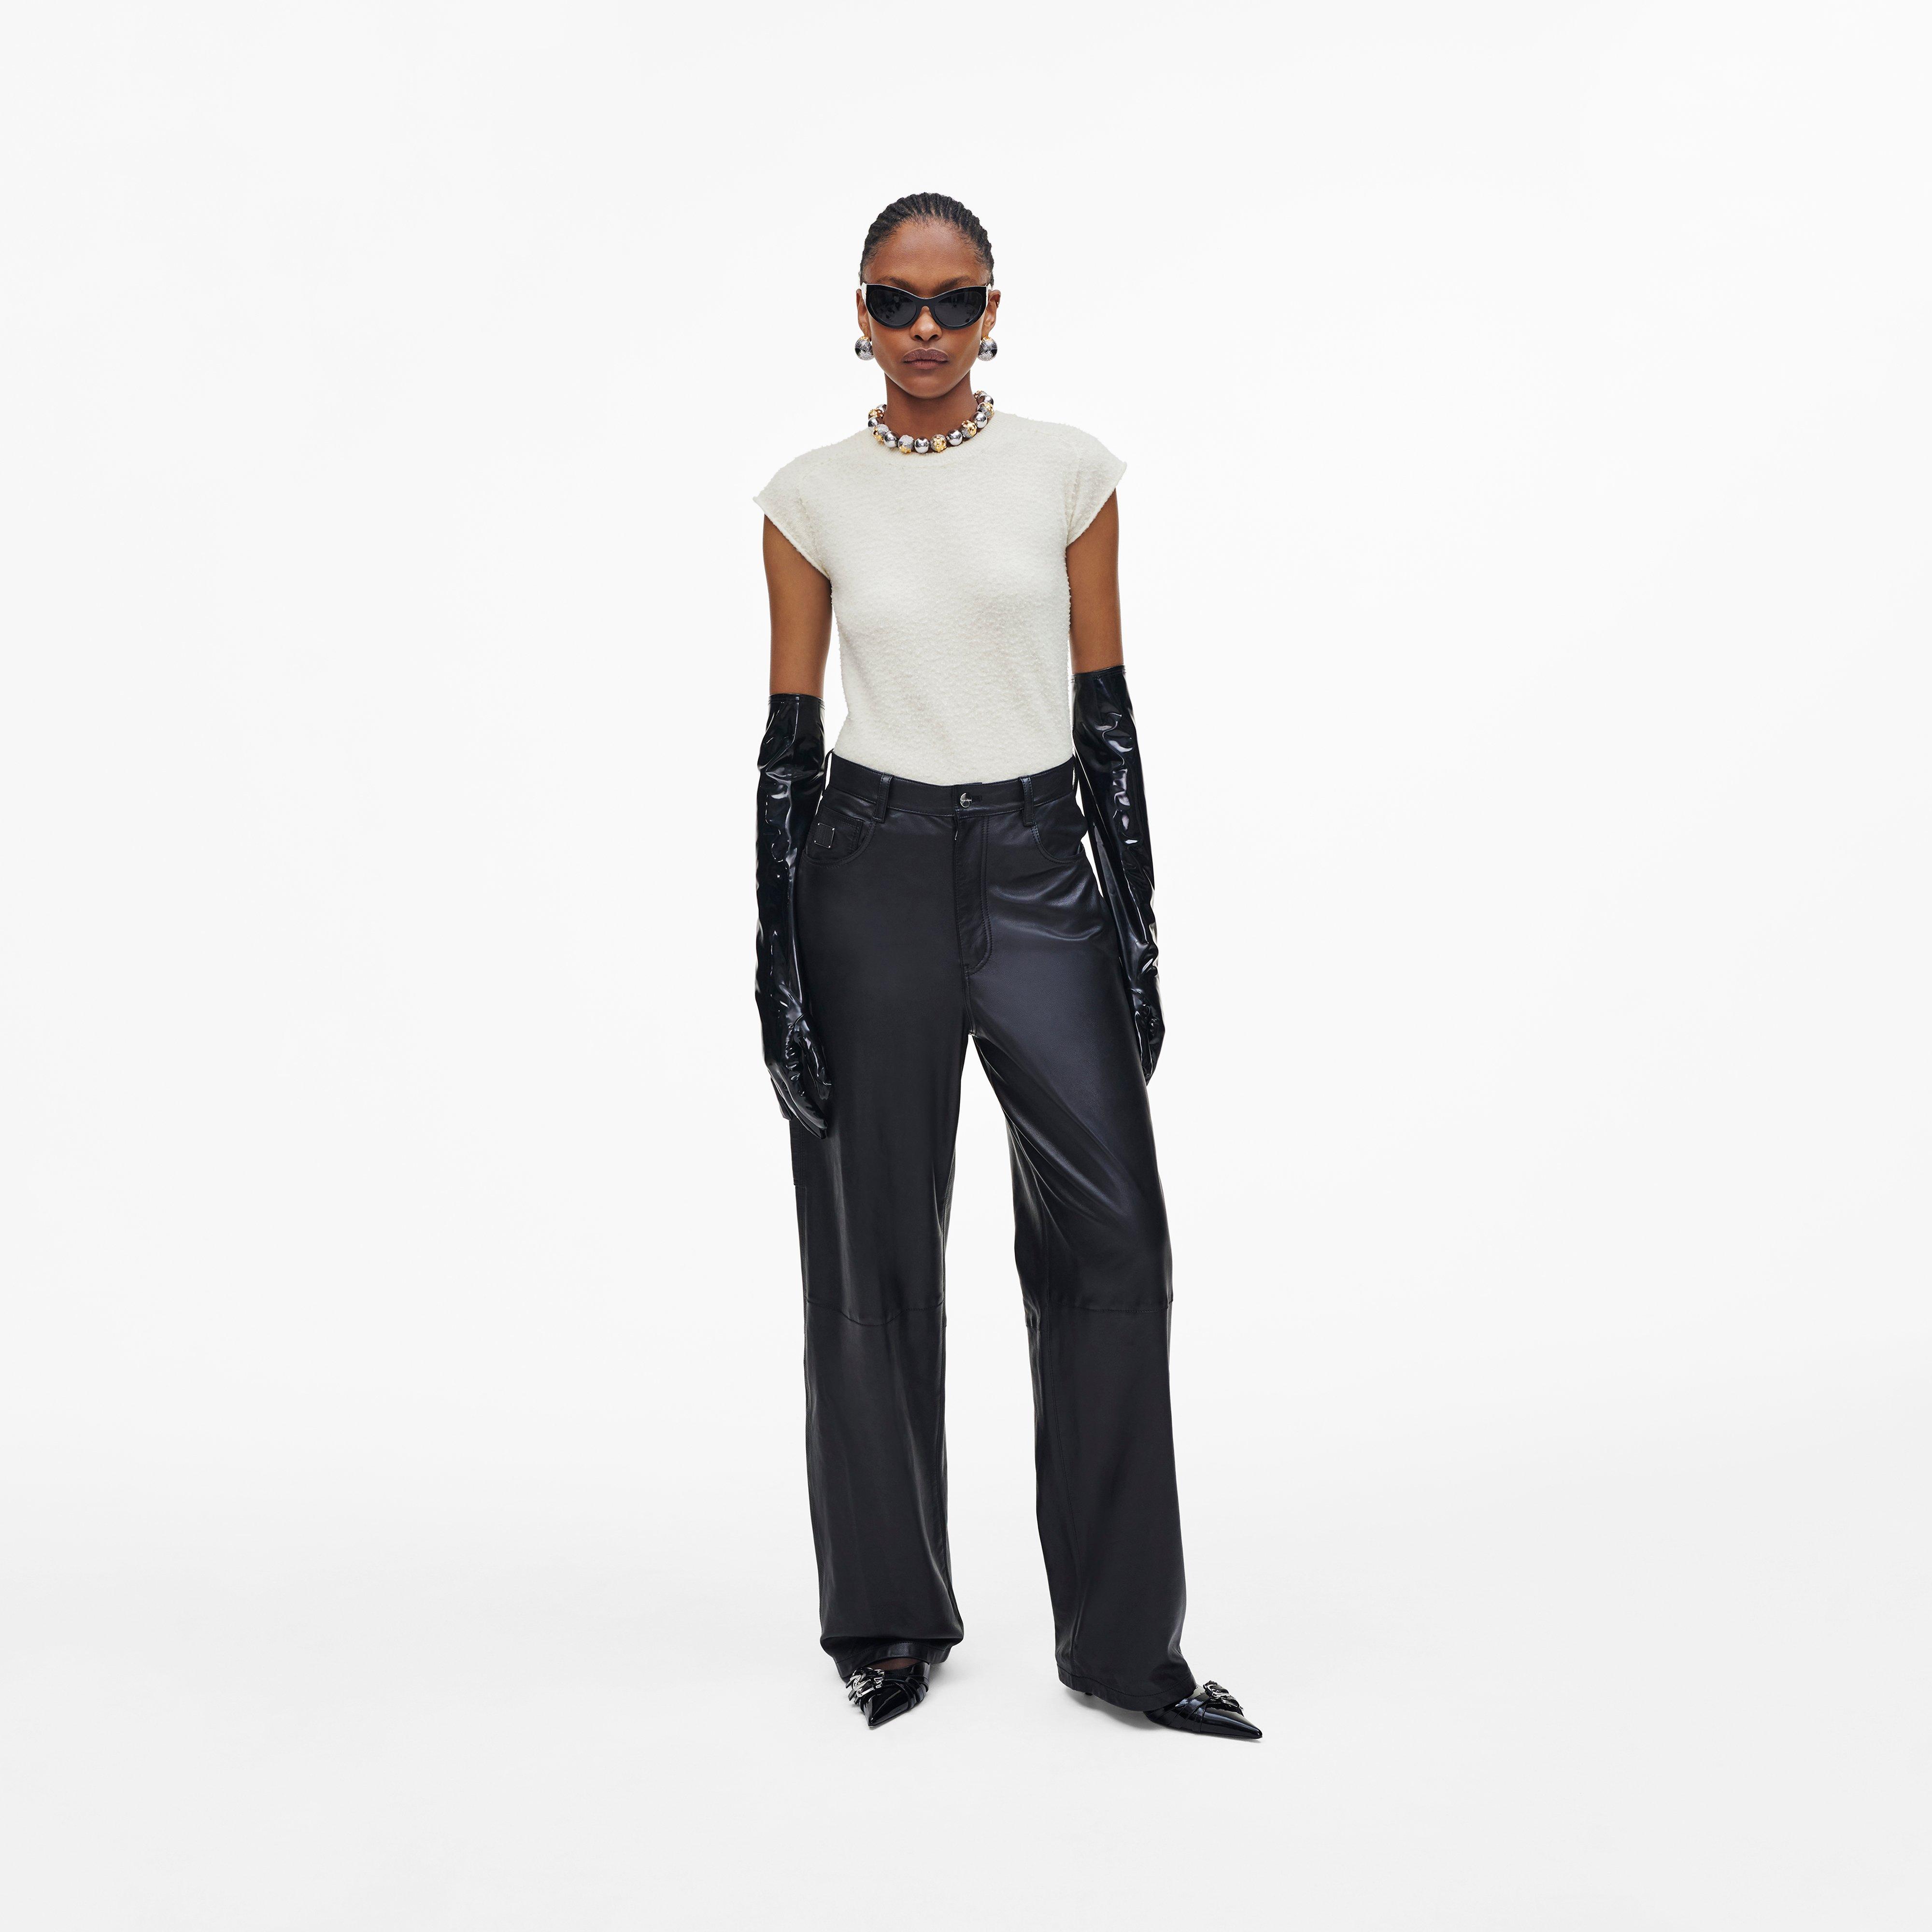 Marc by Marc jacobs Oversized Leather Pant,BLACK